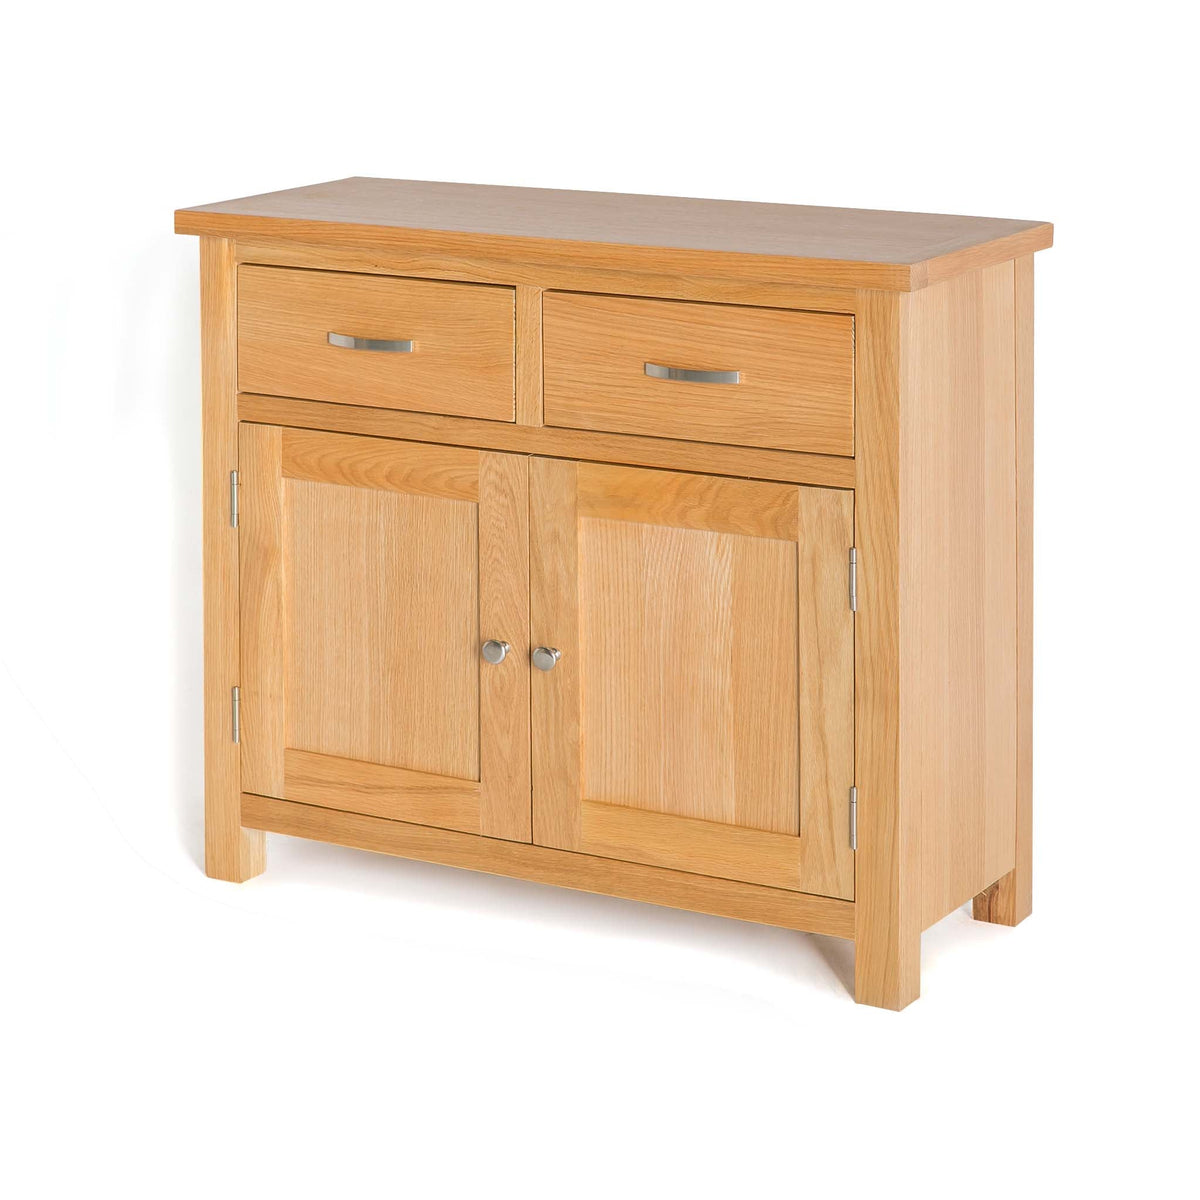 side view of the London Oak Small Sideboard